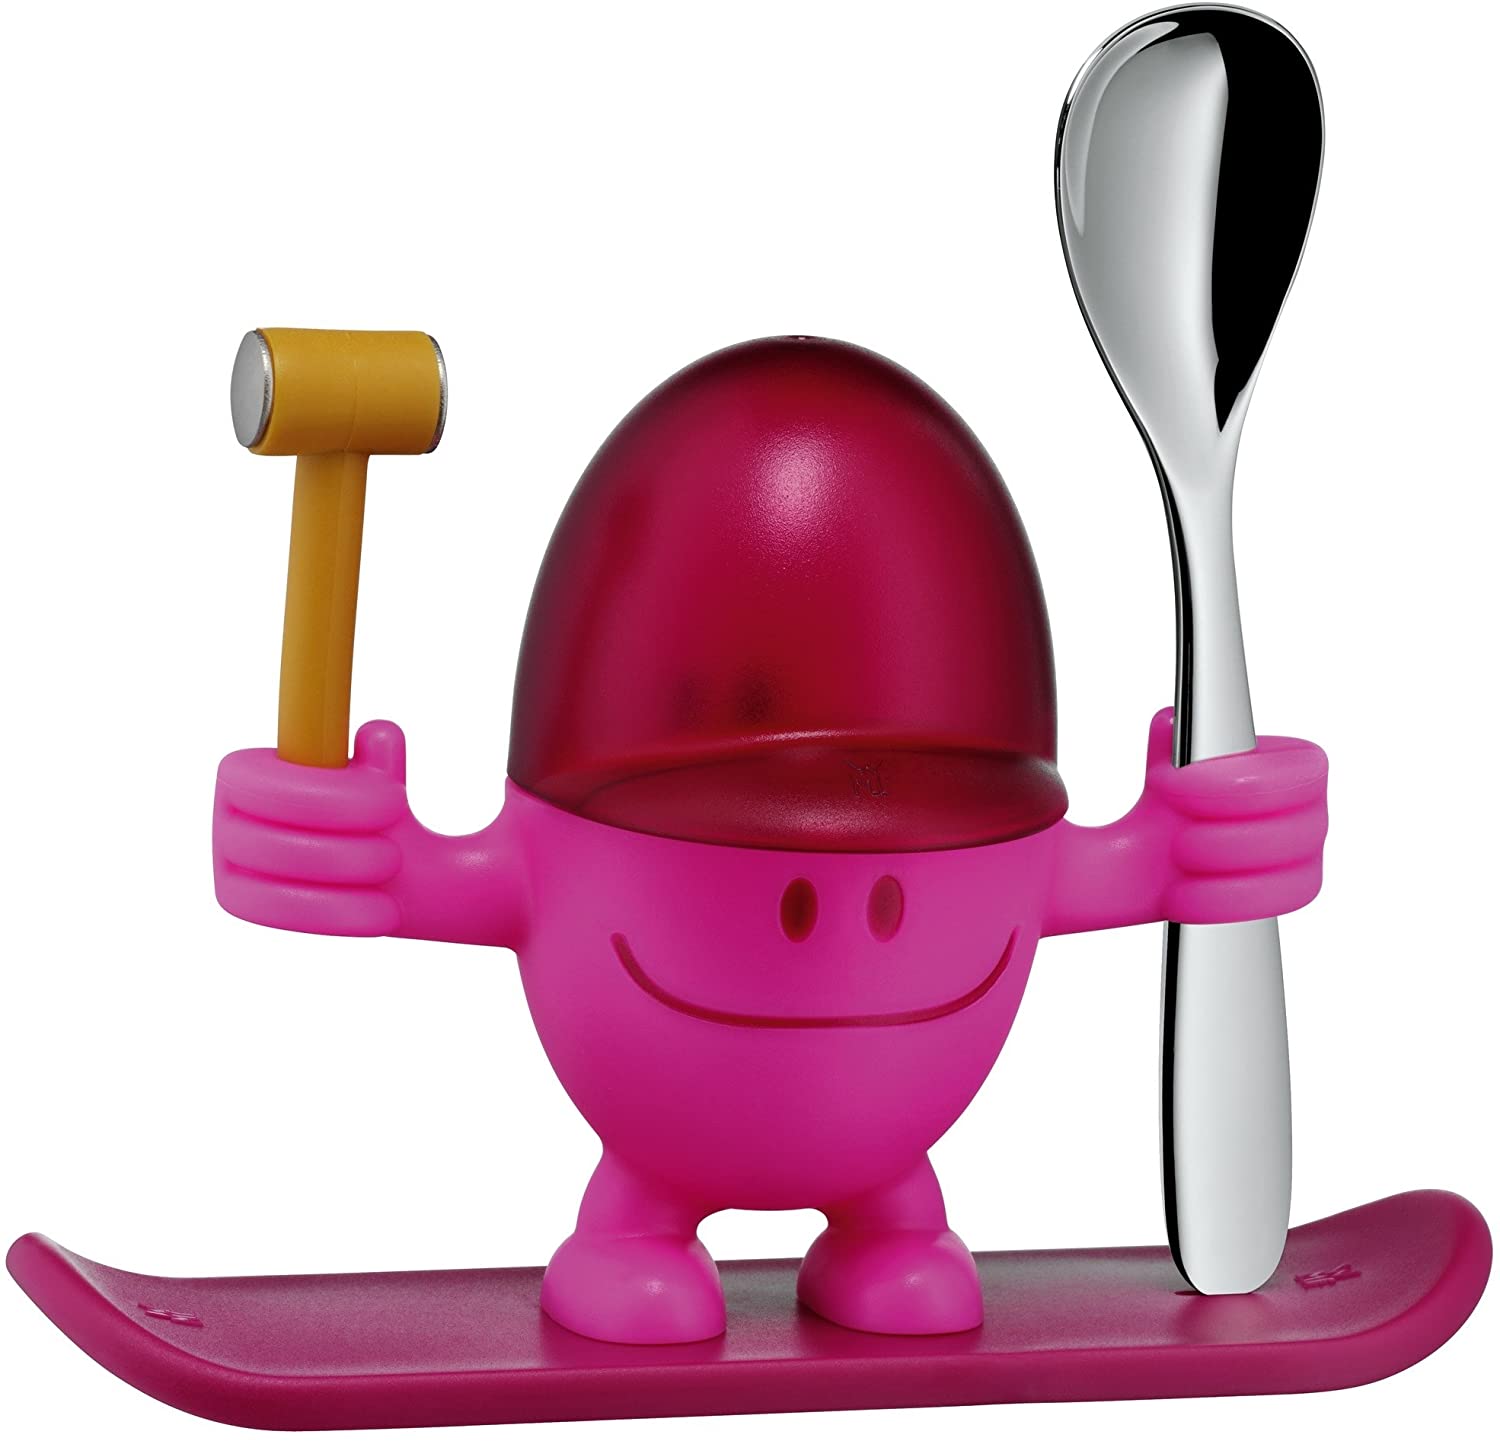 WMF McEgg Egg Cup with Spoon Limited Edition Plastic, Cromargan Polished Stainless Steel